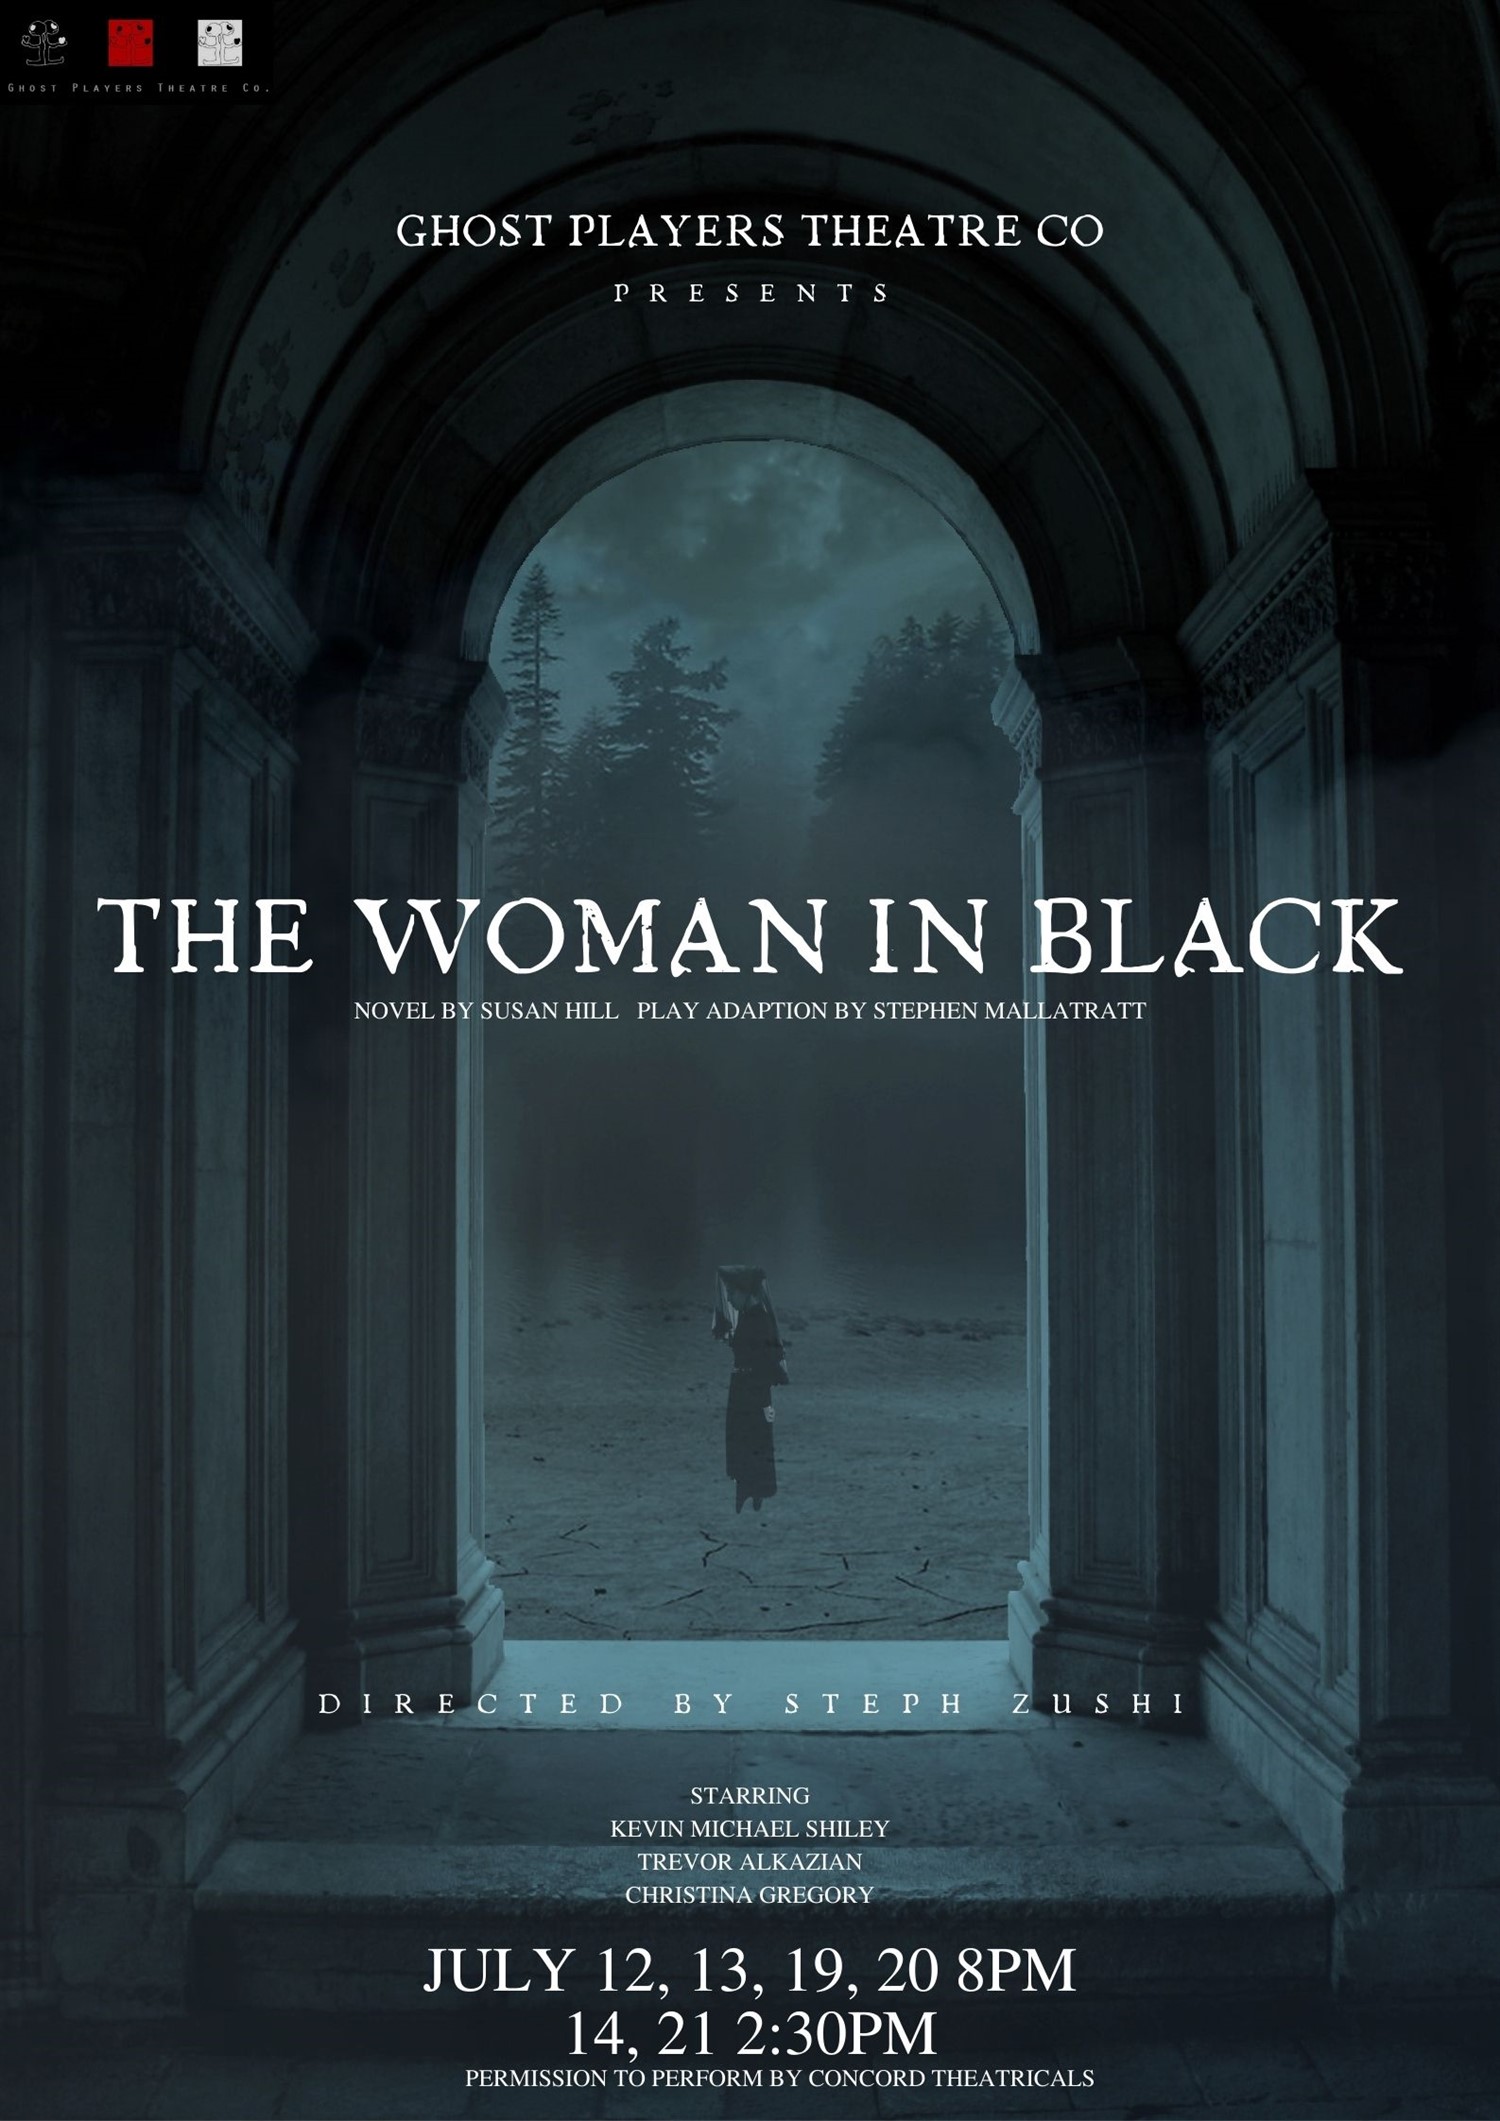 THE WOMAN IN BLACK Presented by Ghost Players Theatre Co. on jul. 23, 00:00@Alemany Theater - Compra entradas y obtén información enGHOST PLAYERS THEATRE CO 